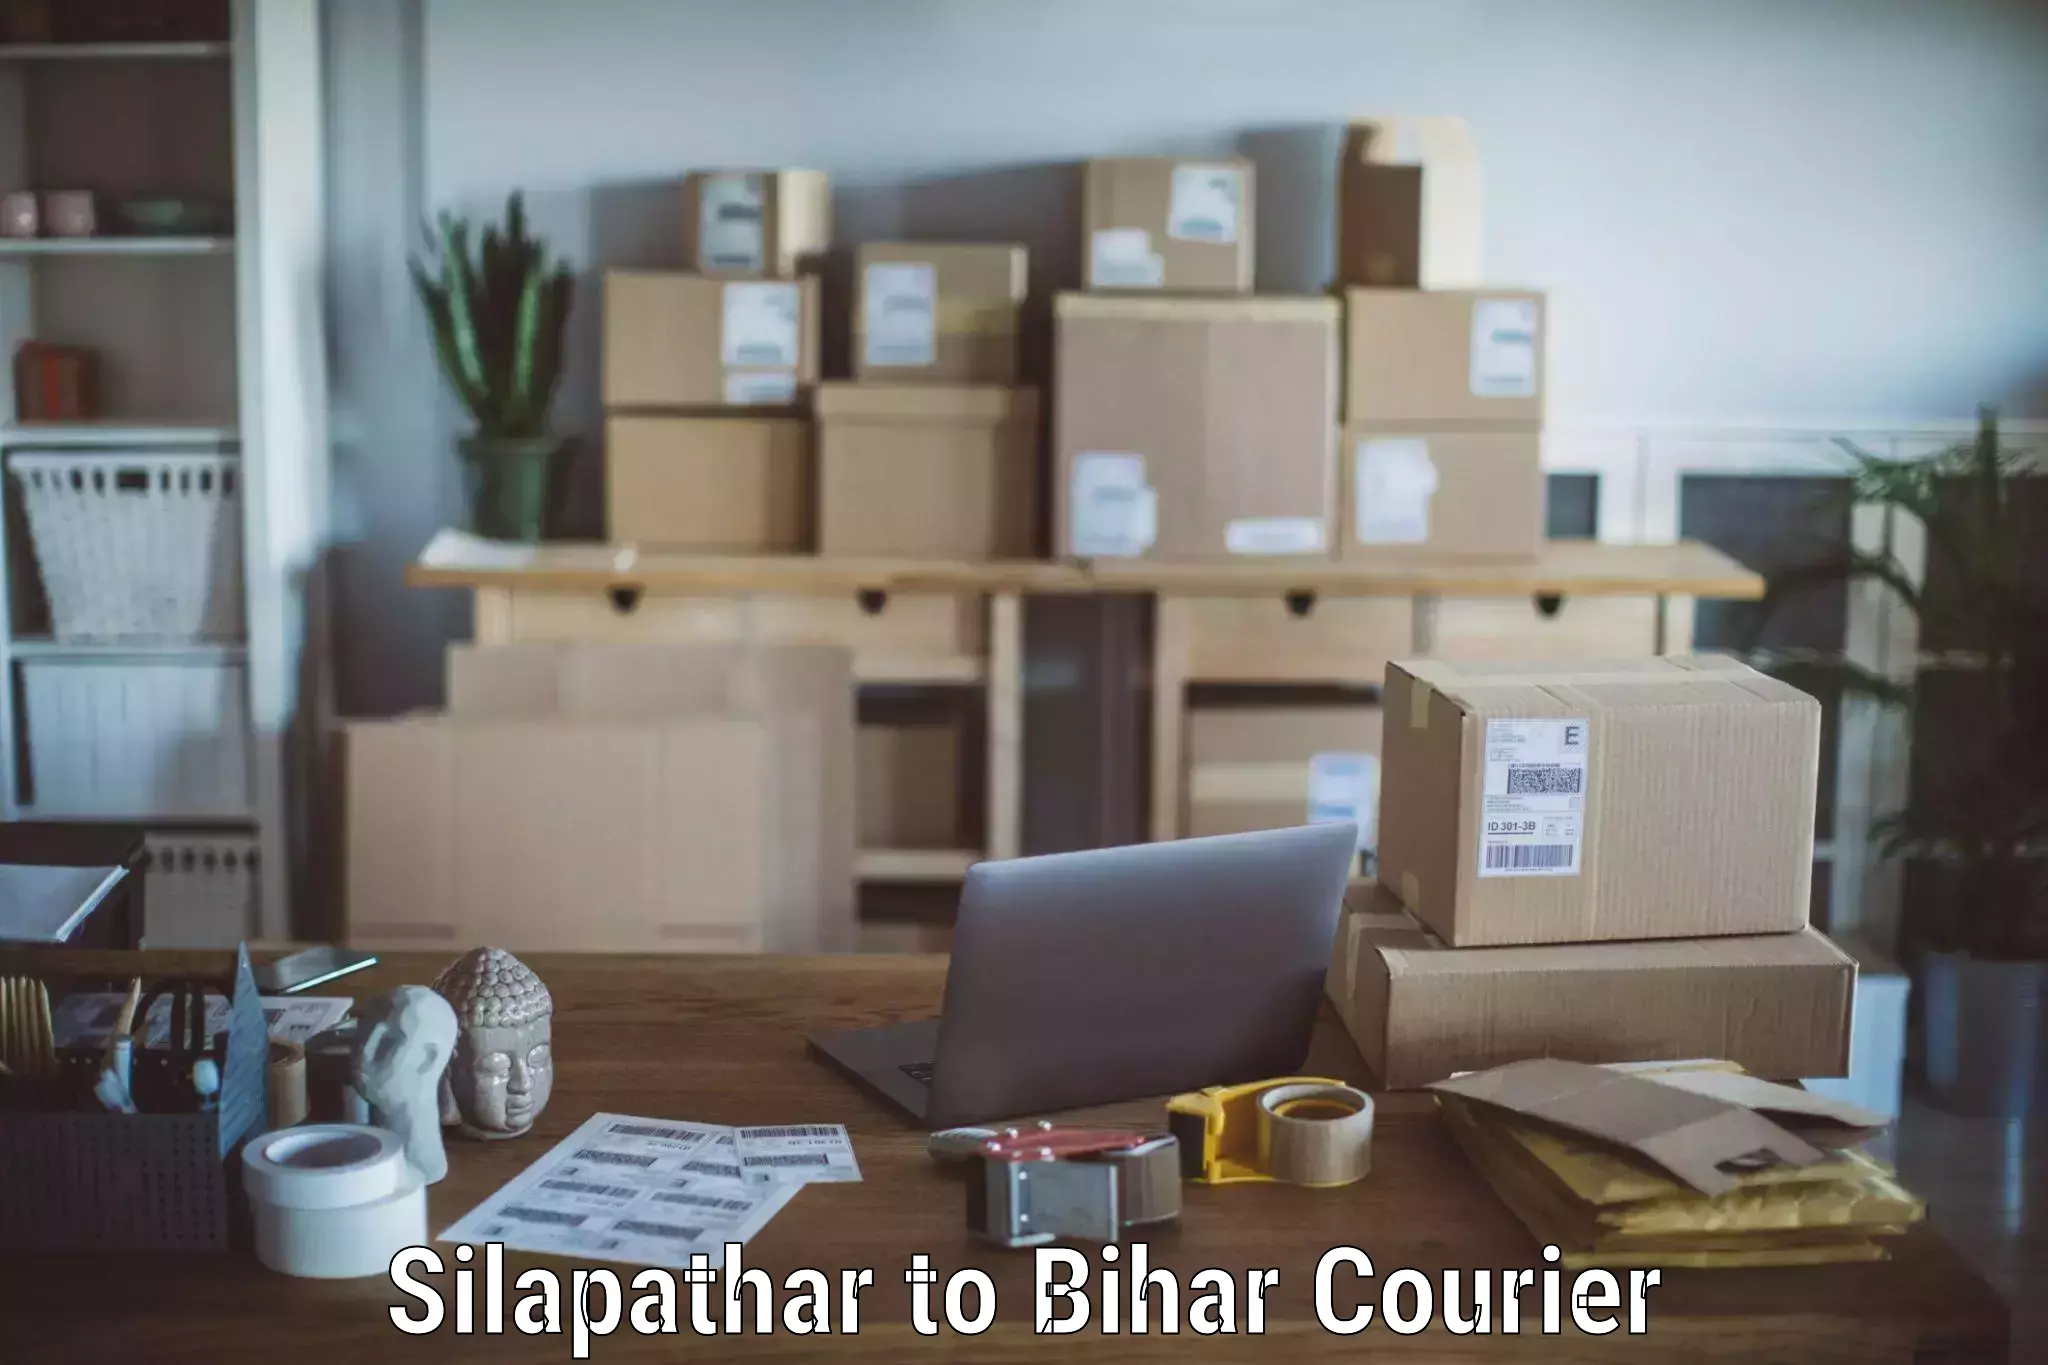 Trusted moving company Silapathar to Bihar